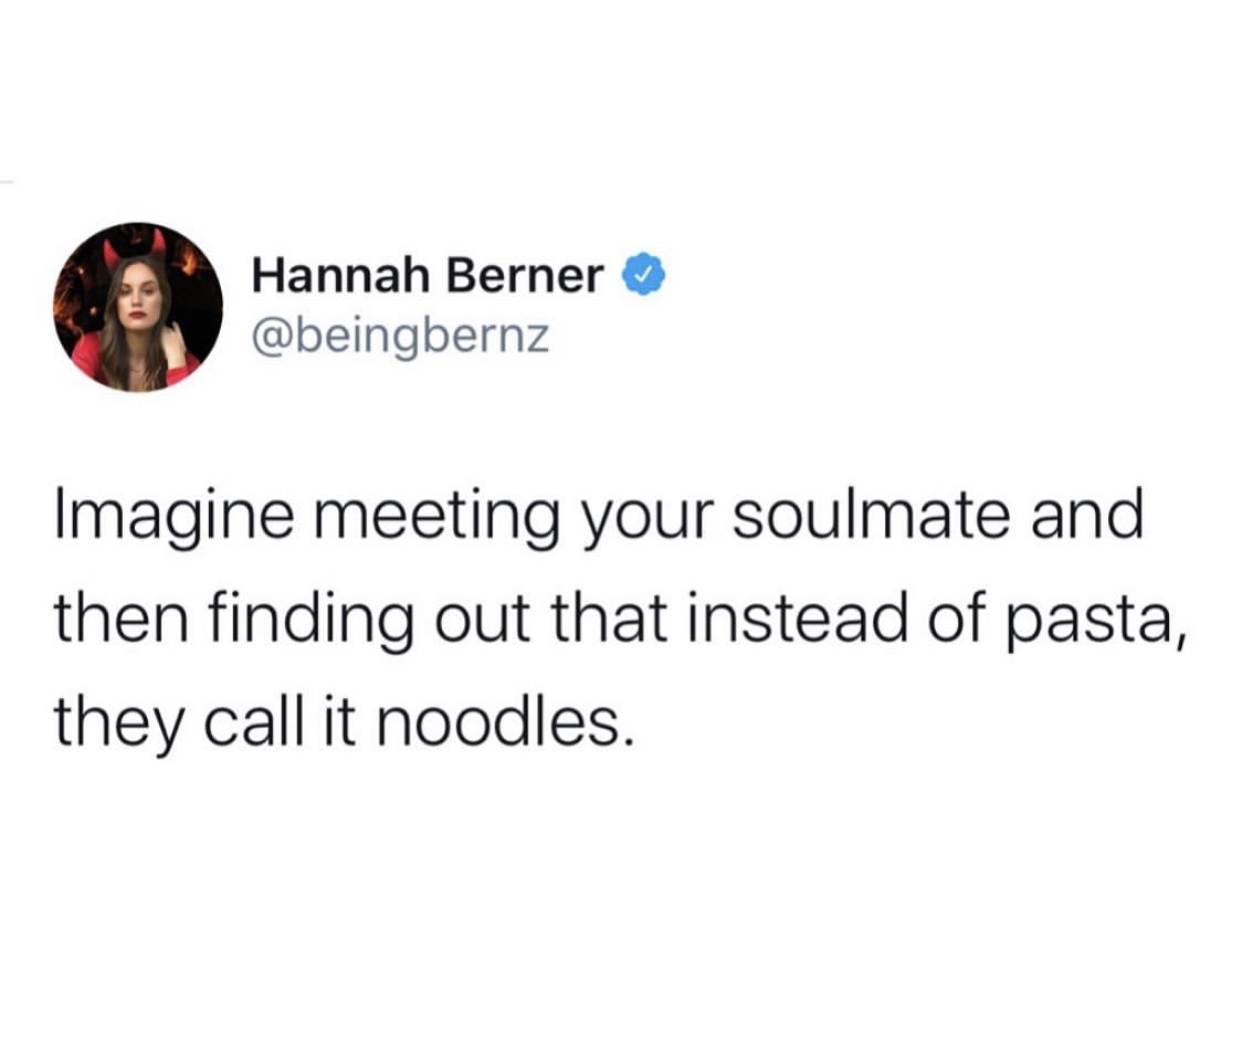 69 420 meme 2019 - Hannah Berner Imagine meeting your soulmate and then finding out that instead of pasta, they call it noodles.